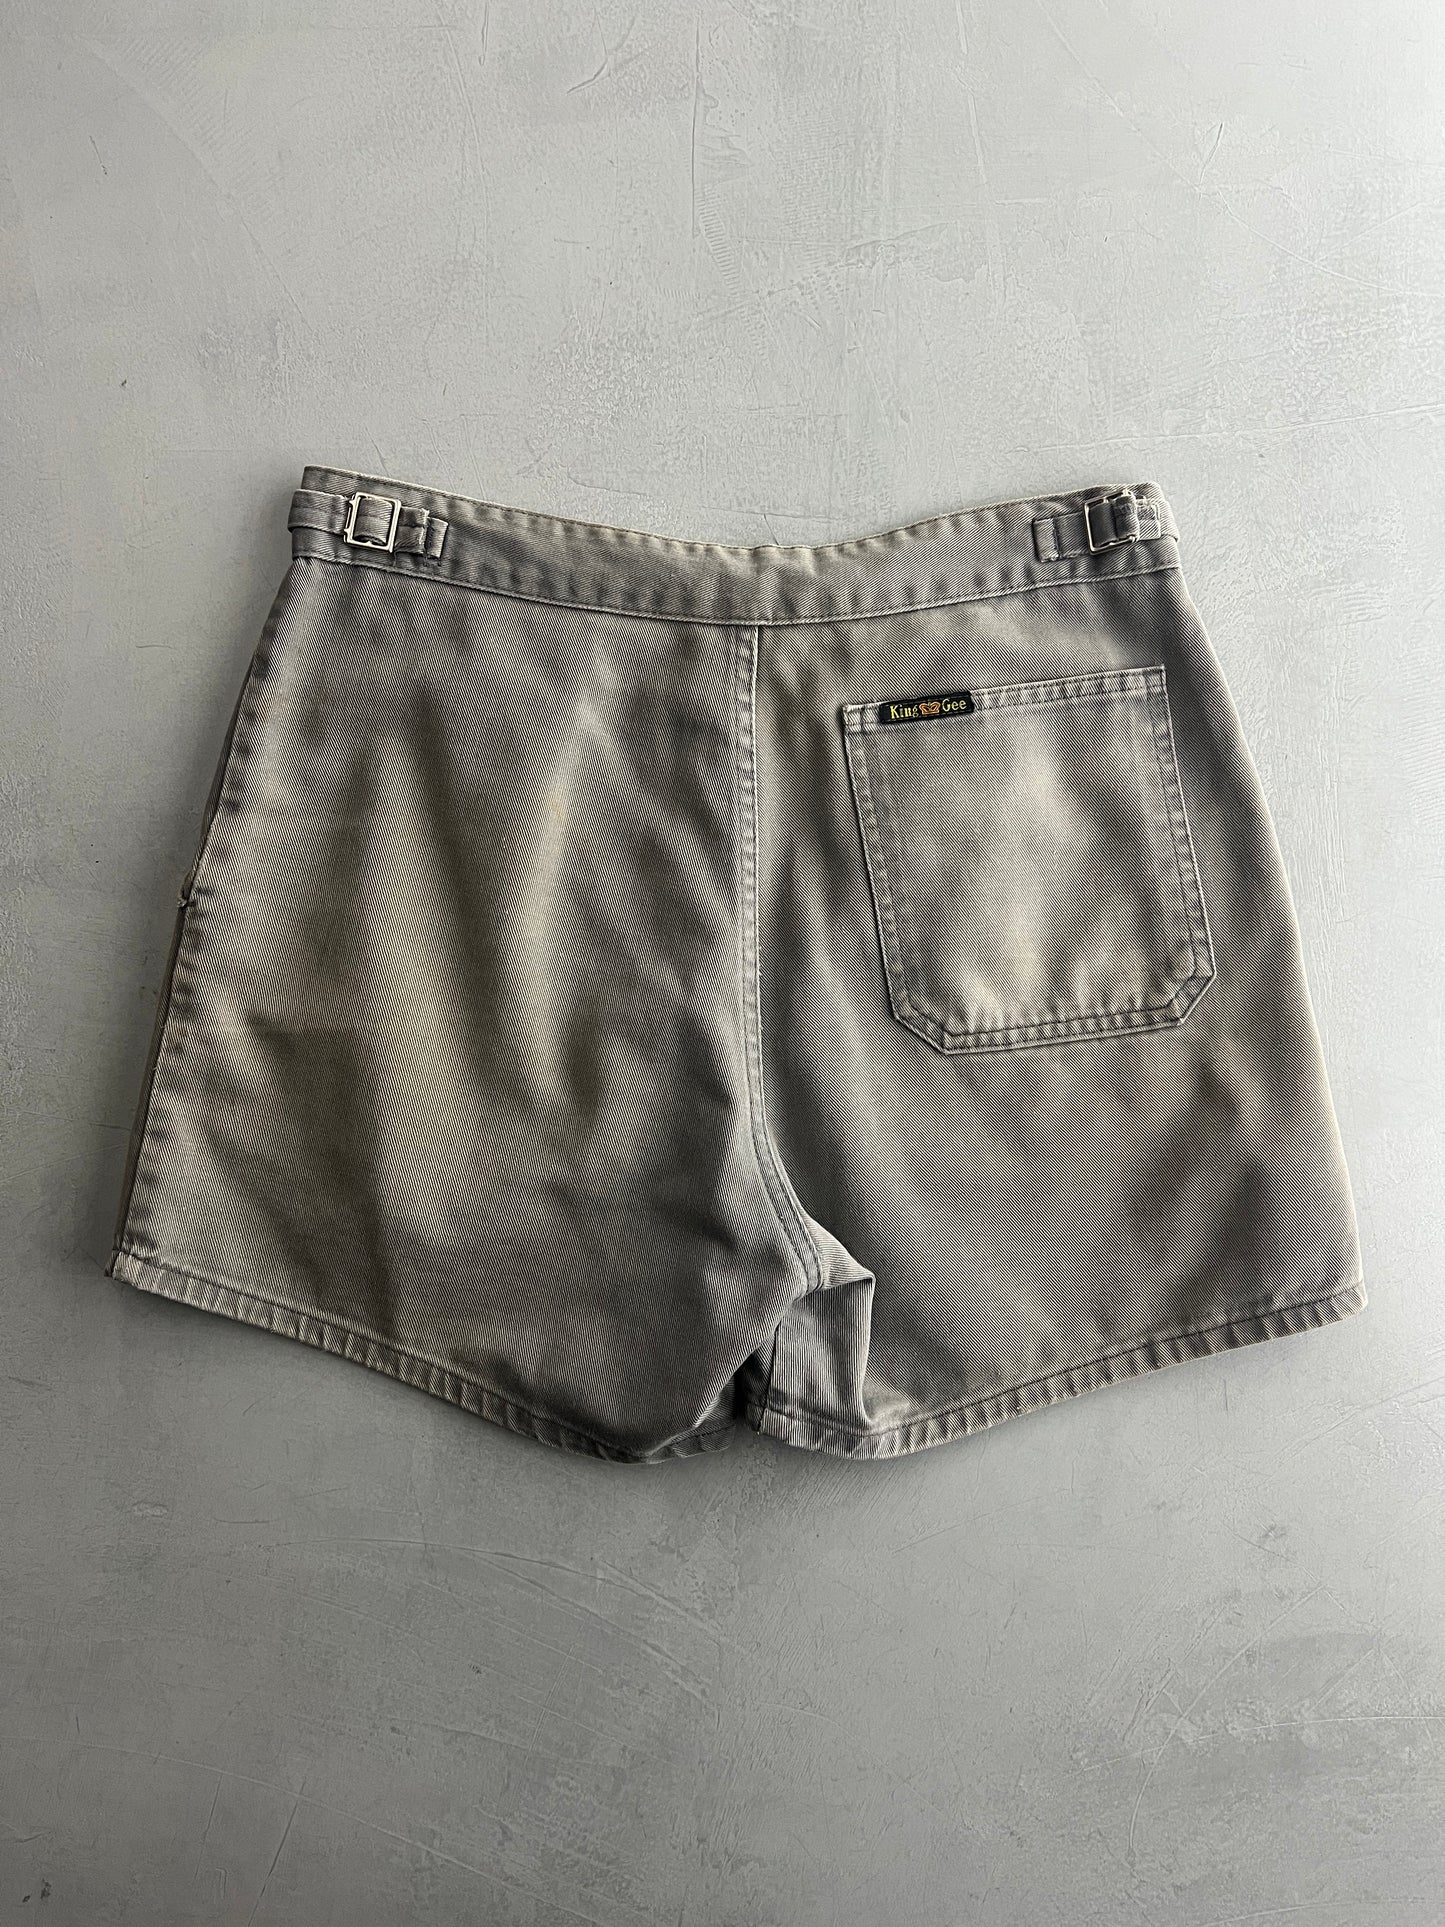 Faded King Gee Work Shorts [31"]